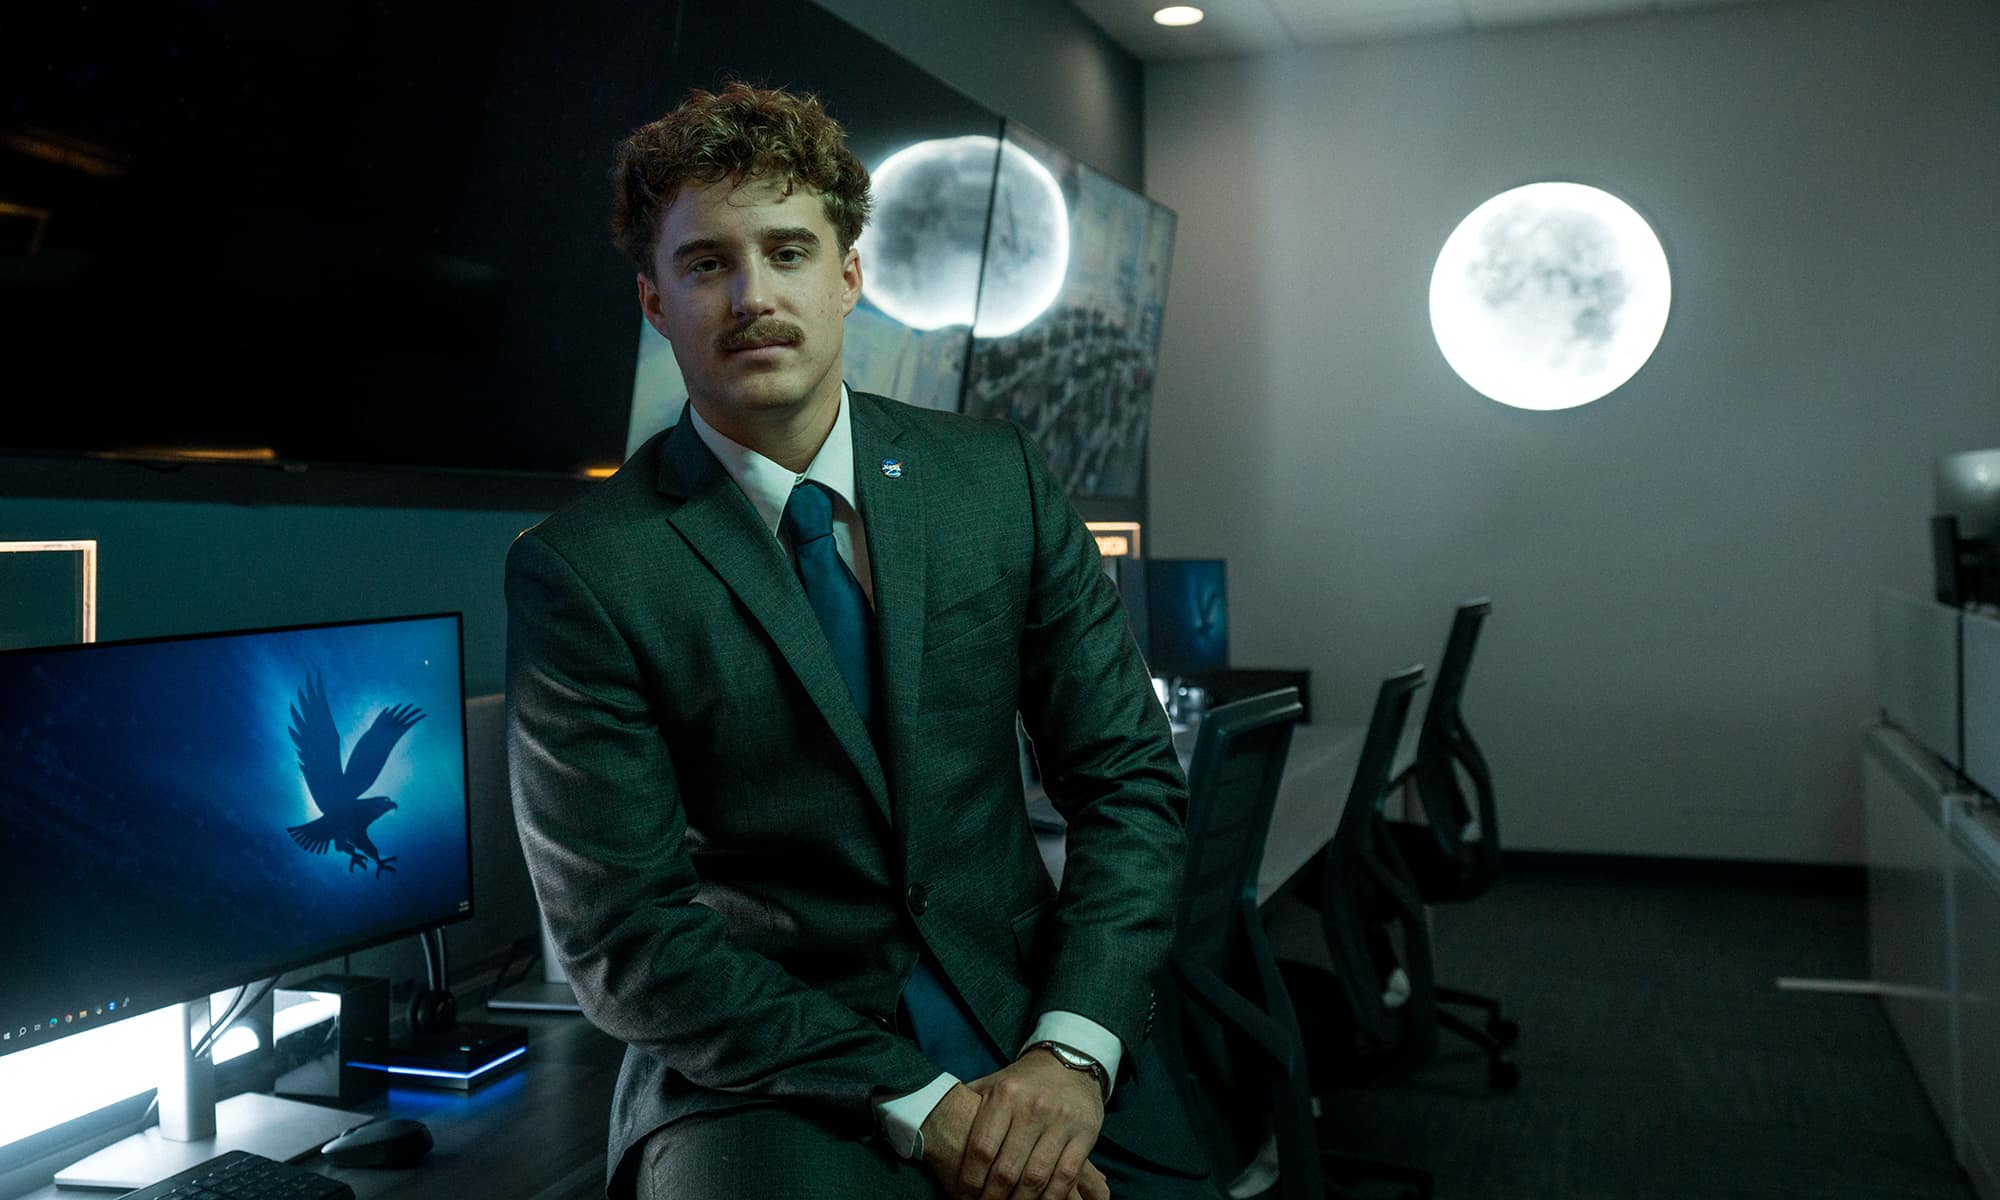 A student with a mustache wearing a suit and tie leans casually against a desk with several computer monitors in a darkened room. A glowing moon shines on the wall behind him.